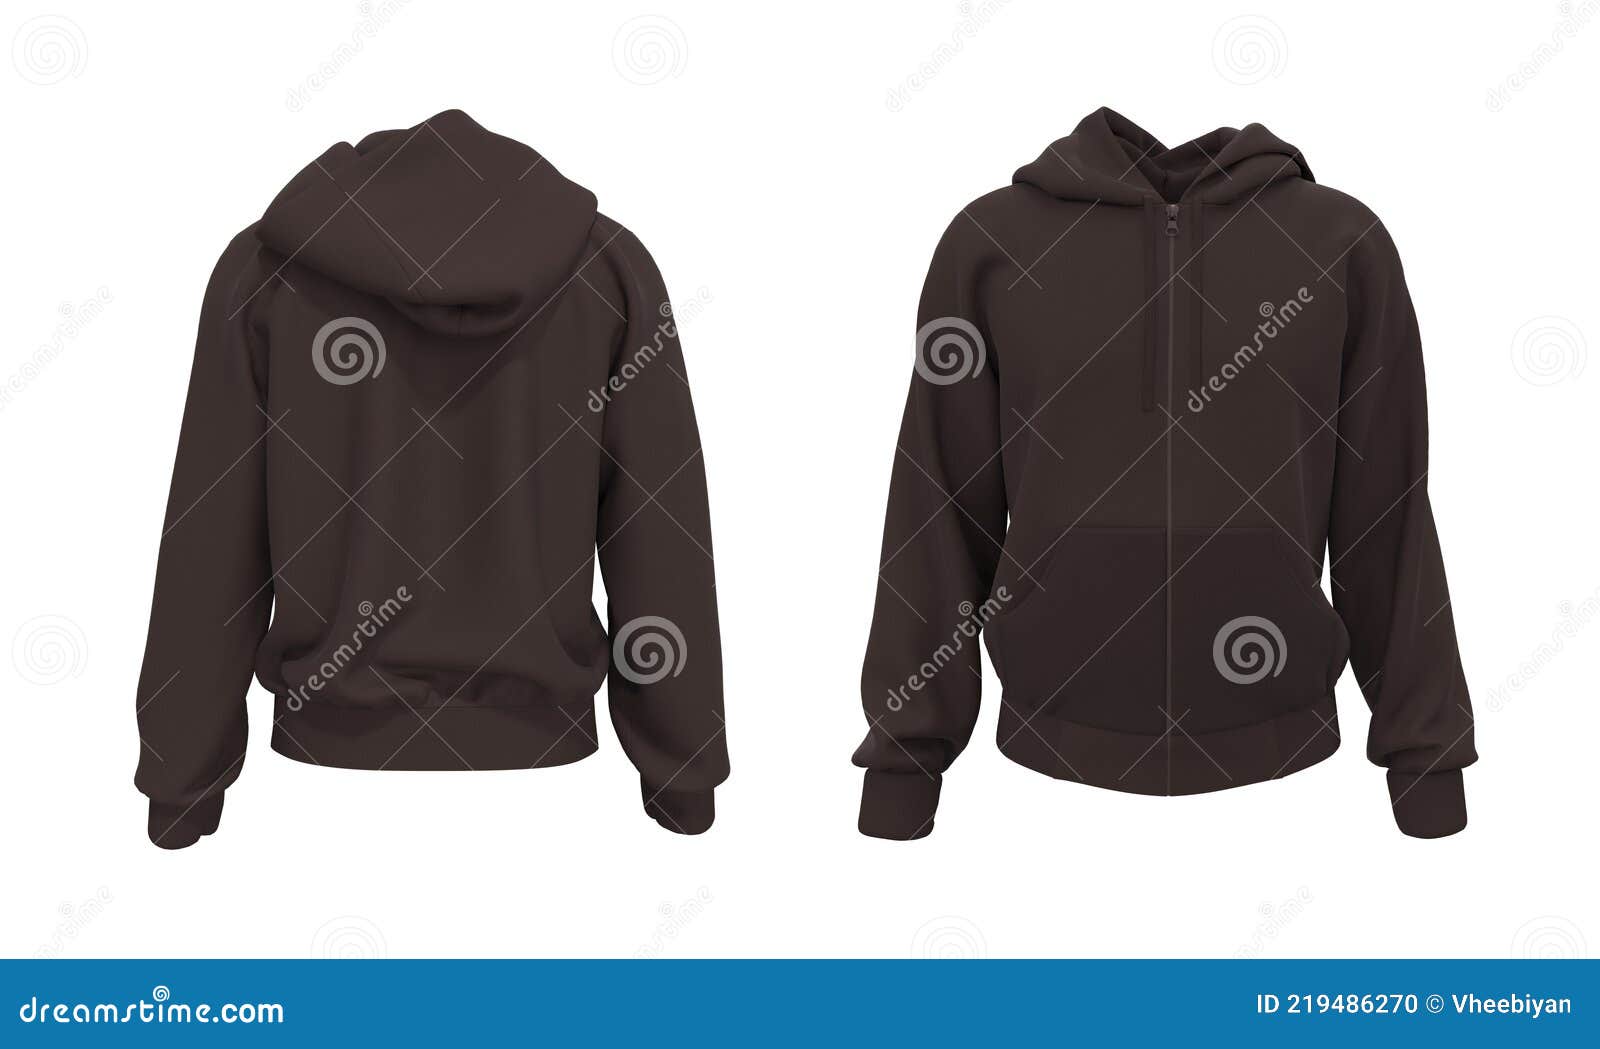 Blank Hooded Sweatshirt Mockup with Zipper in Front and Back Views ...